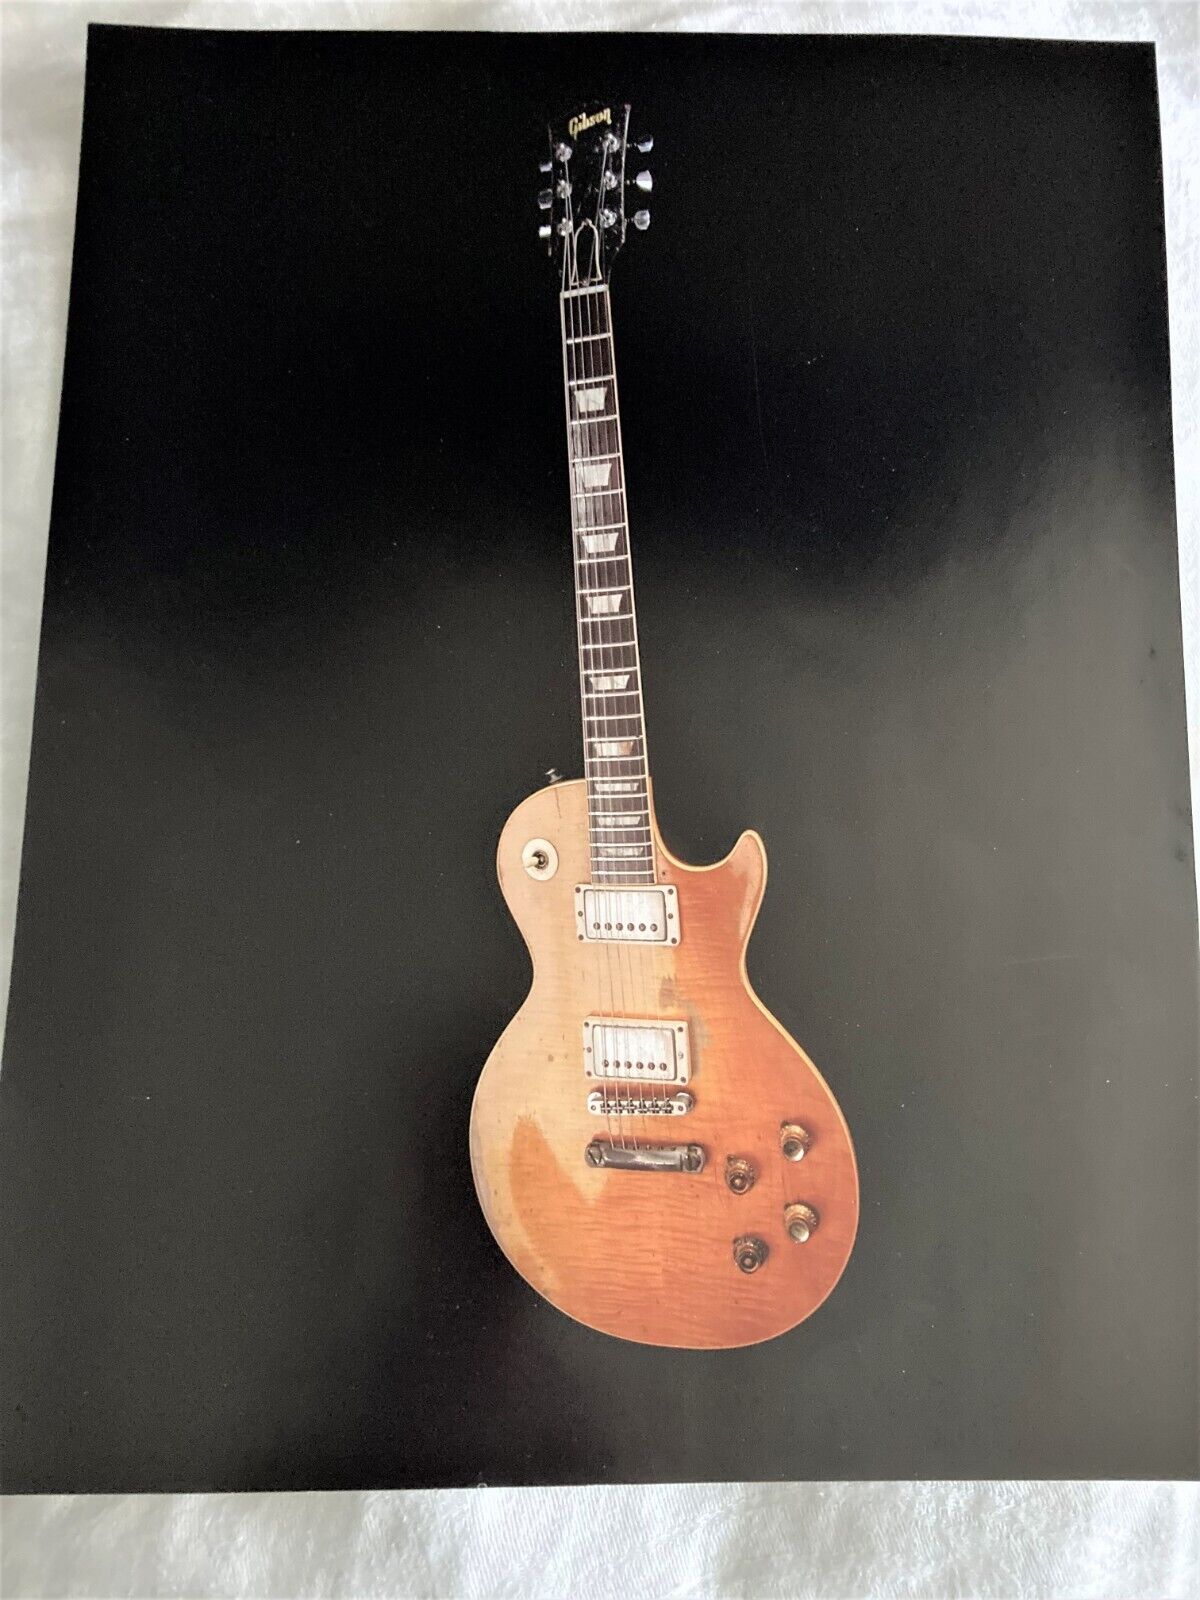 Gibson Les Paul 1959 Burst Peter Green Gary Moore Acquisition Pic #3 March 2006